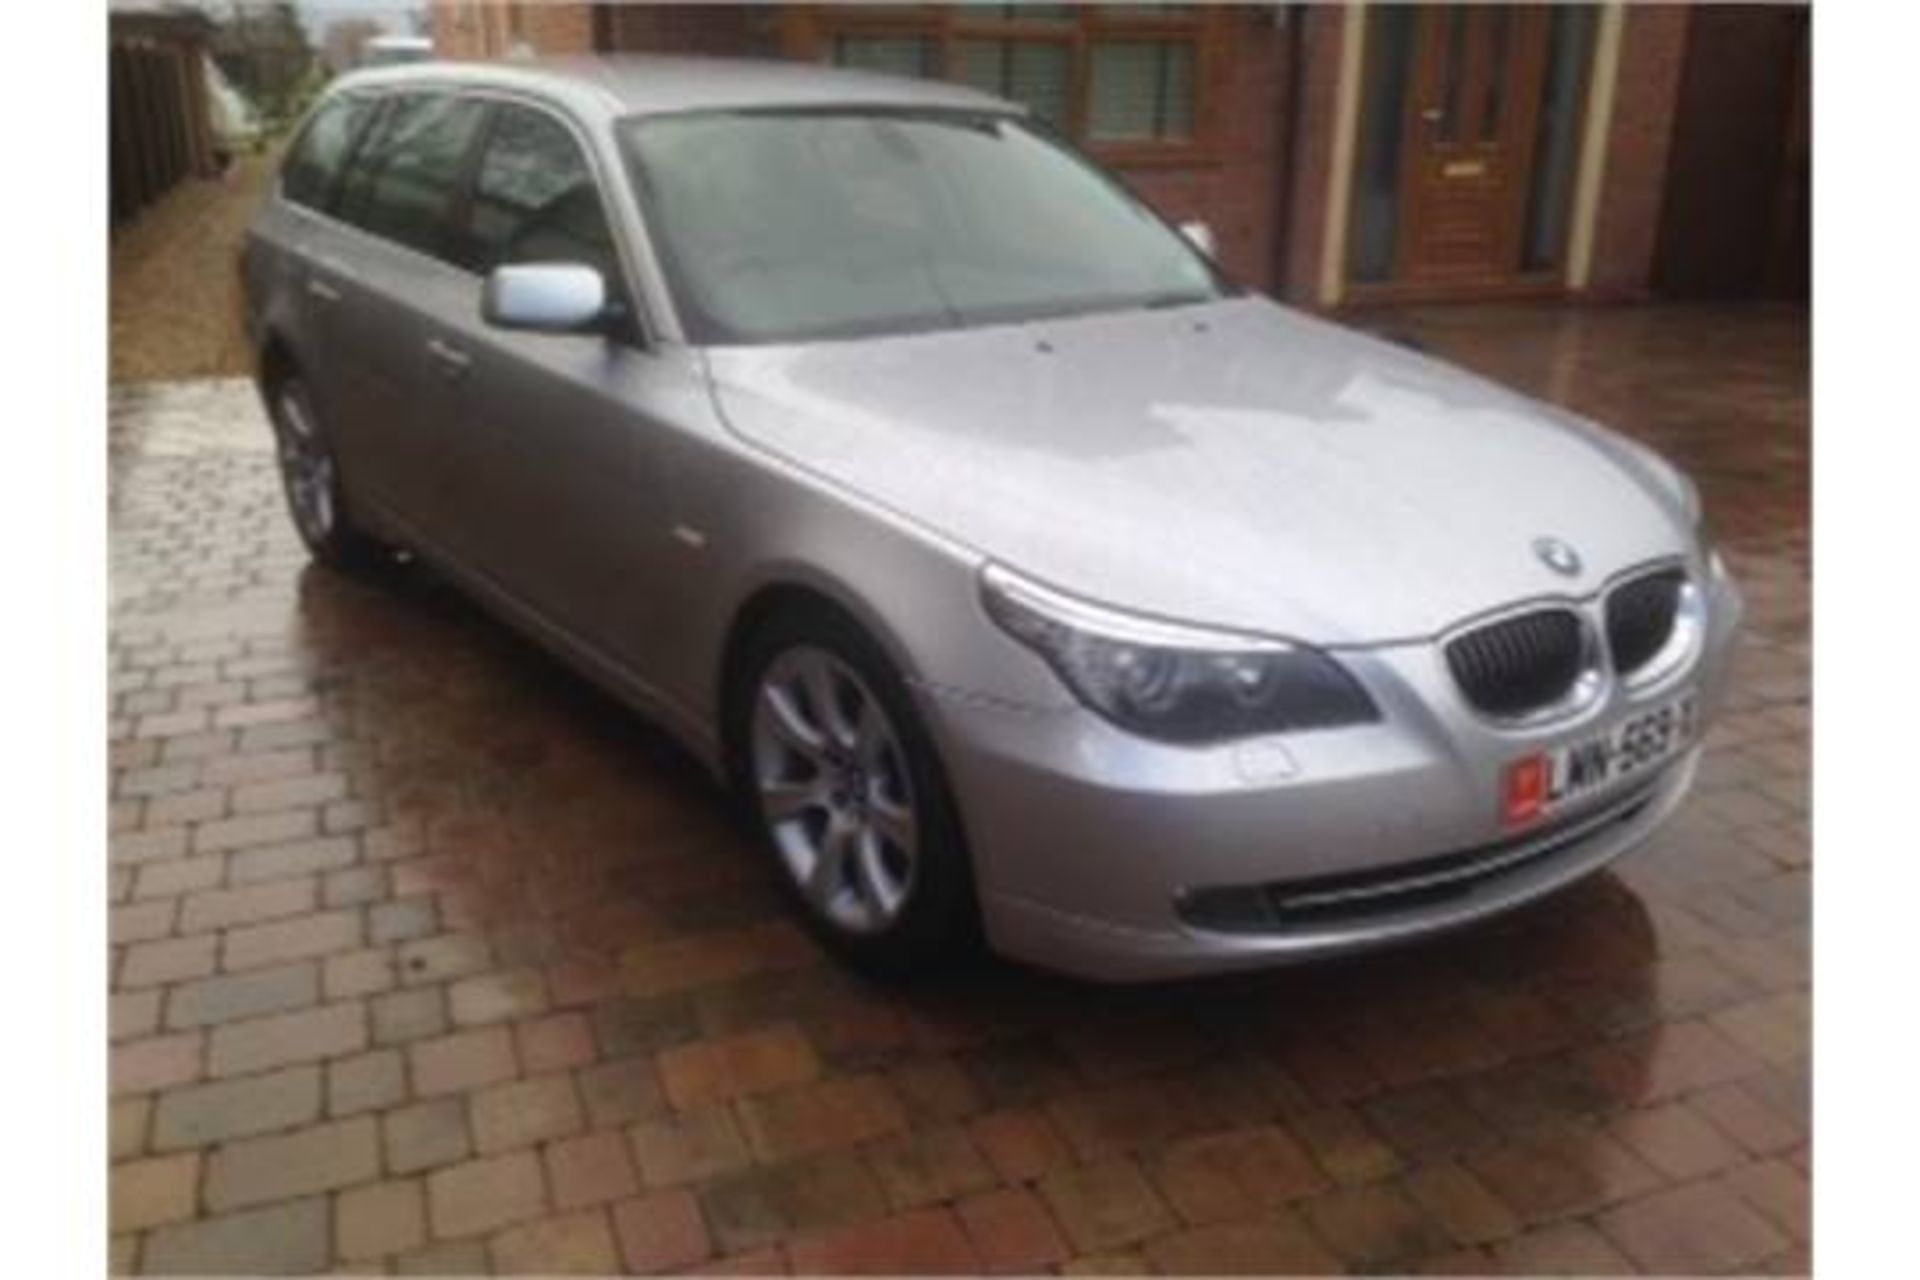 BMW 5 SERIES TOURING 530D, BX58 PNN, 3.0L TD 6 SPEED, DIESEL, AUTOMATIC I DRIVE, 5 DOOR, 95,000 - Image 2 of 10